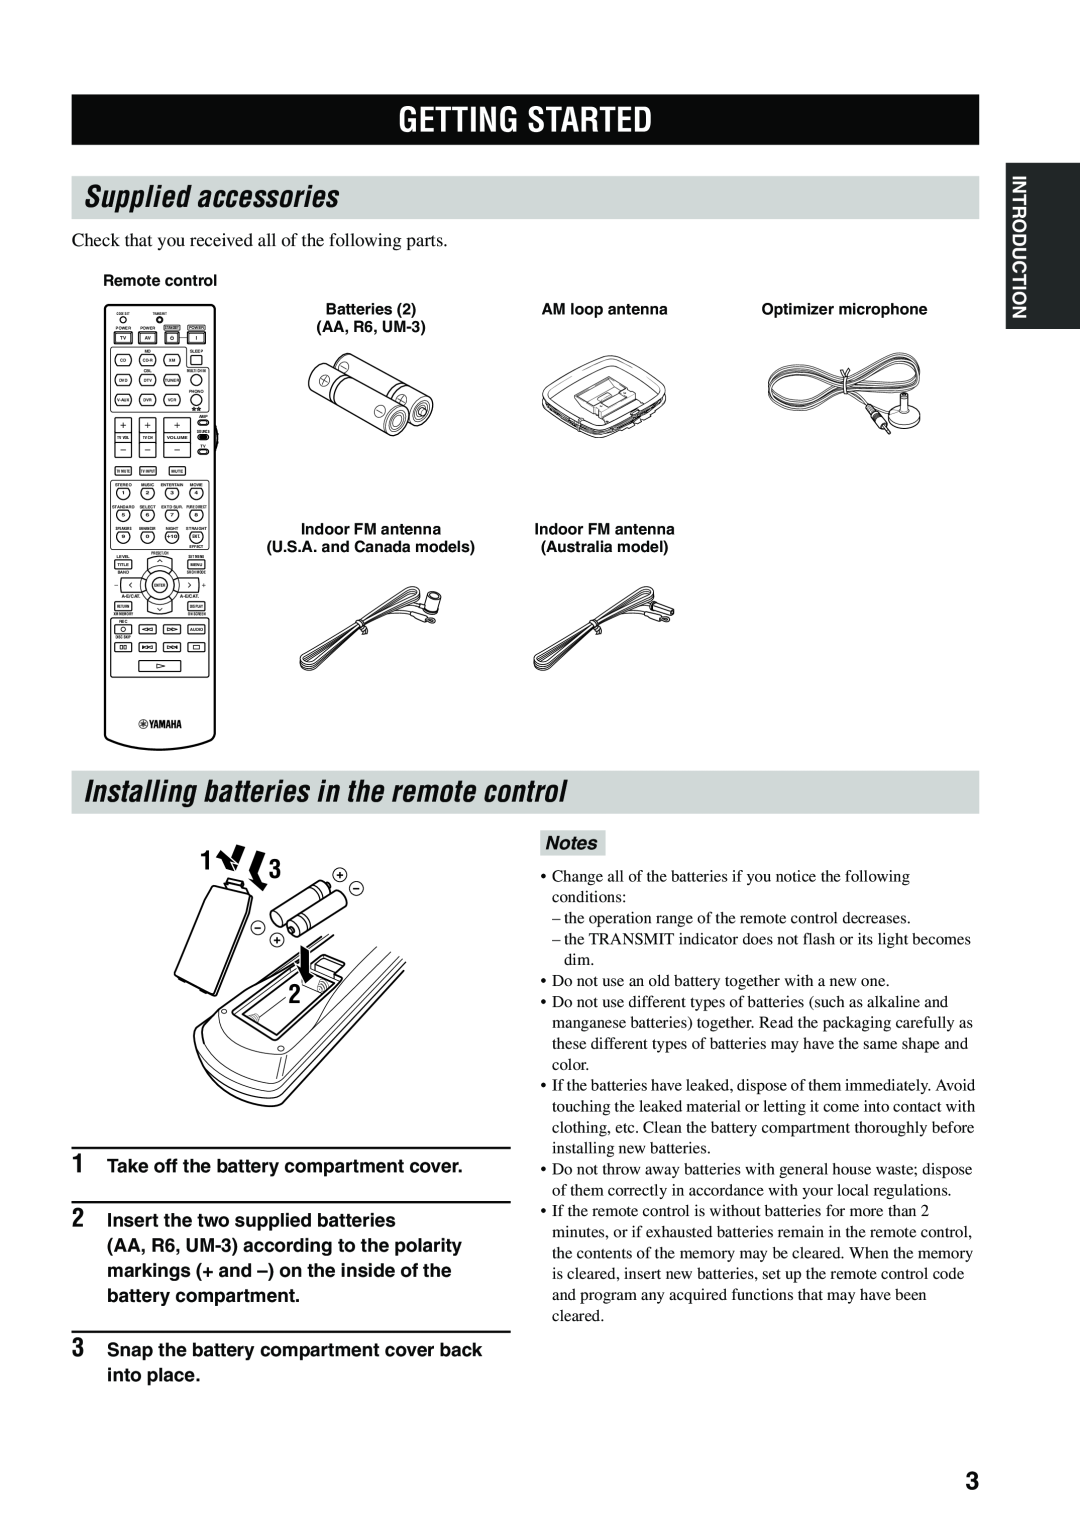 Yamaha HTR-5960 owner manual Getting Started, Supplied accessories, Installing batteries in the remote control, 13 2 